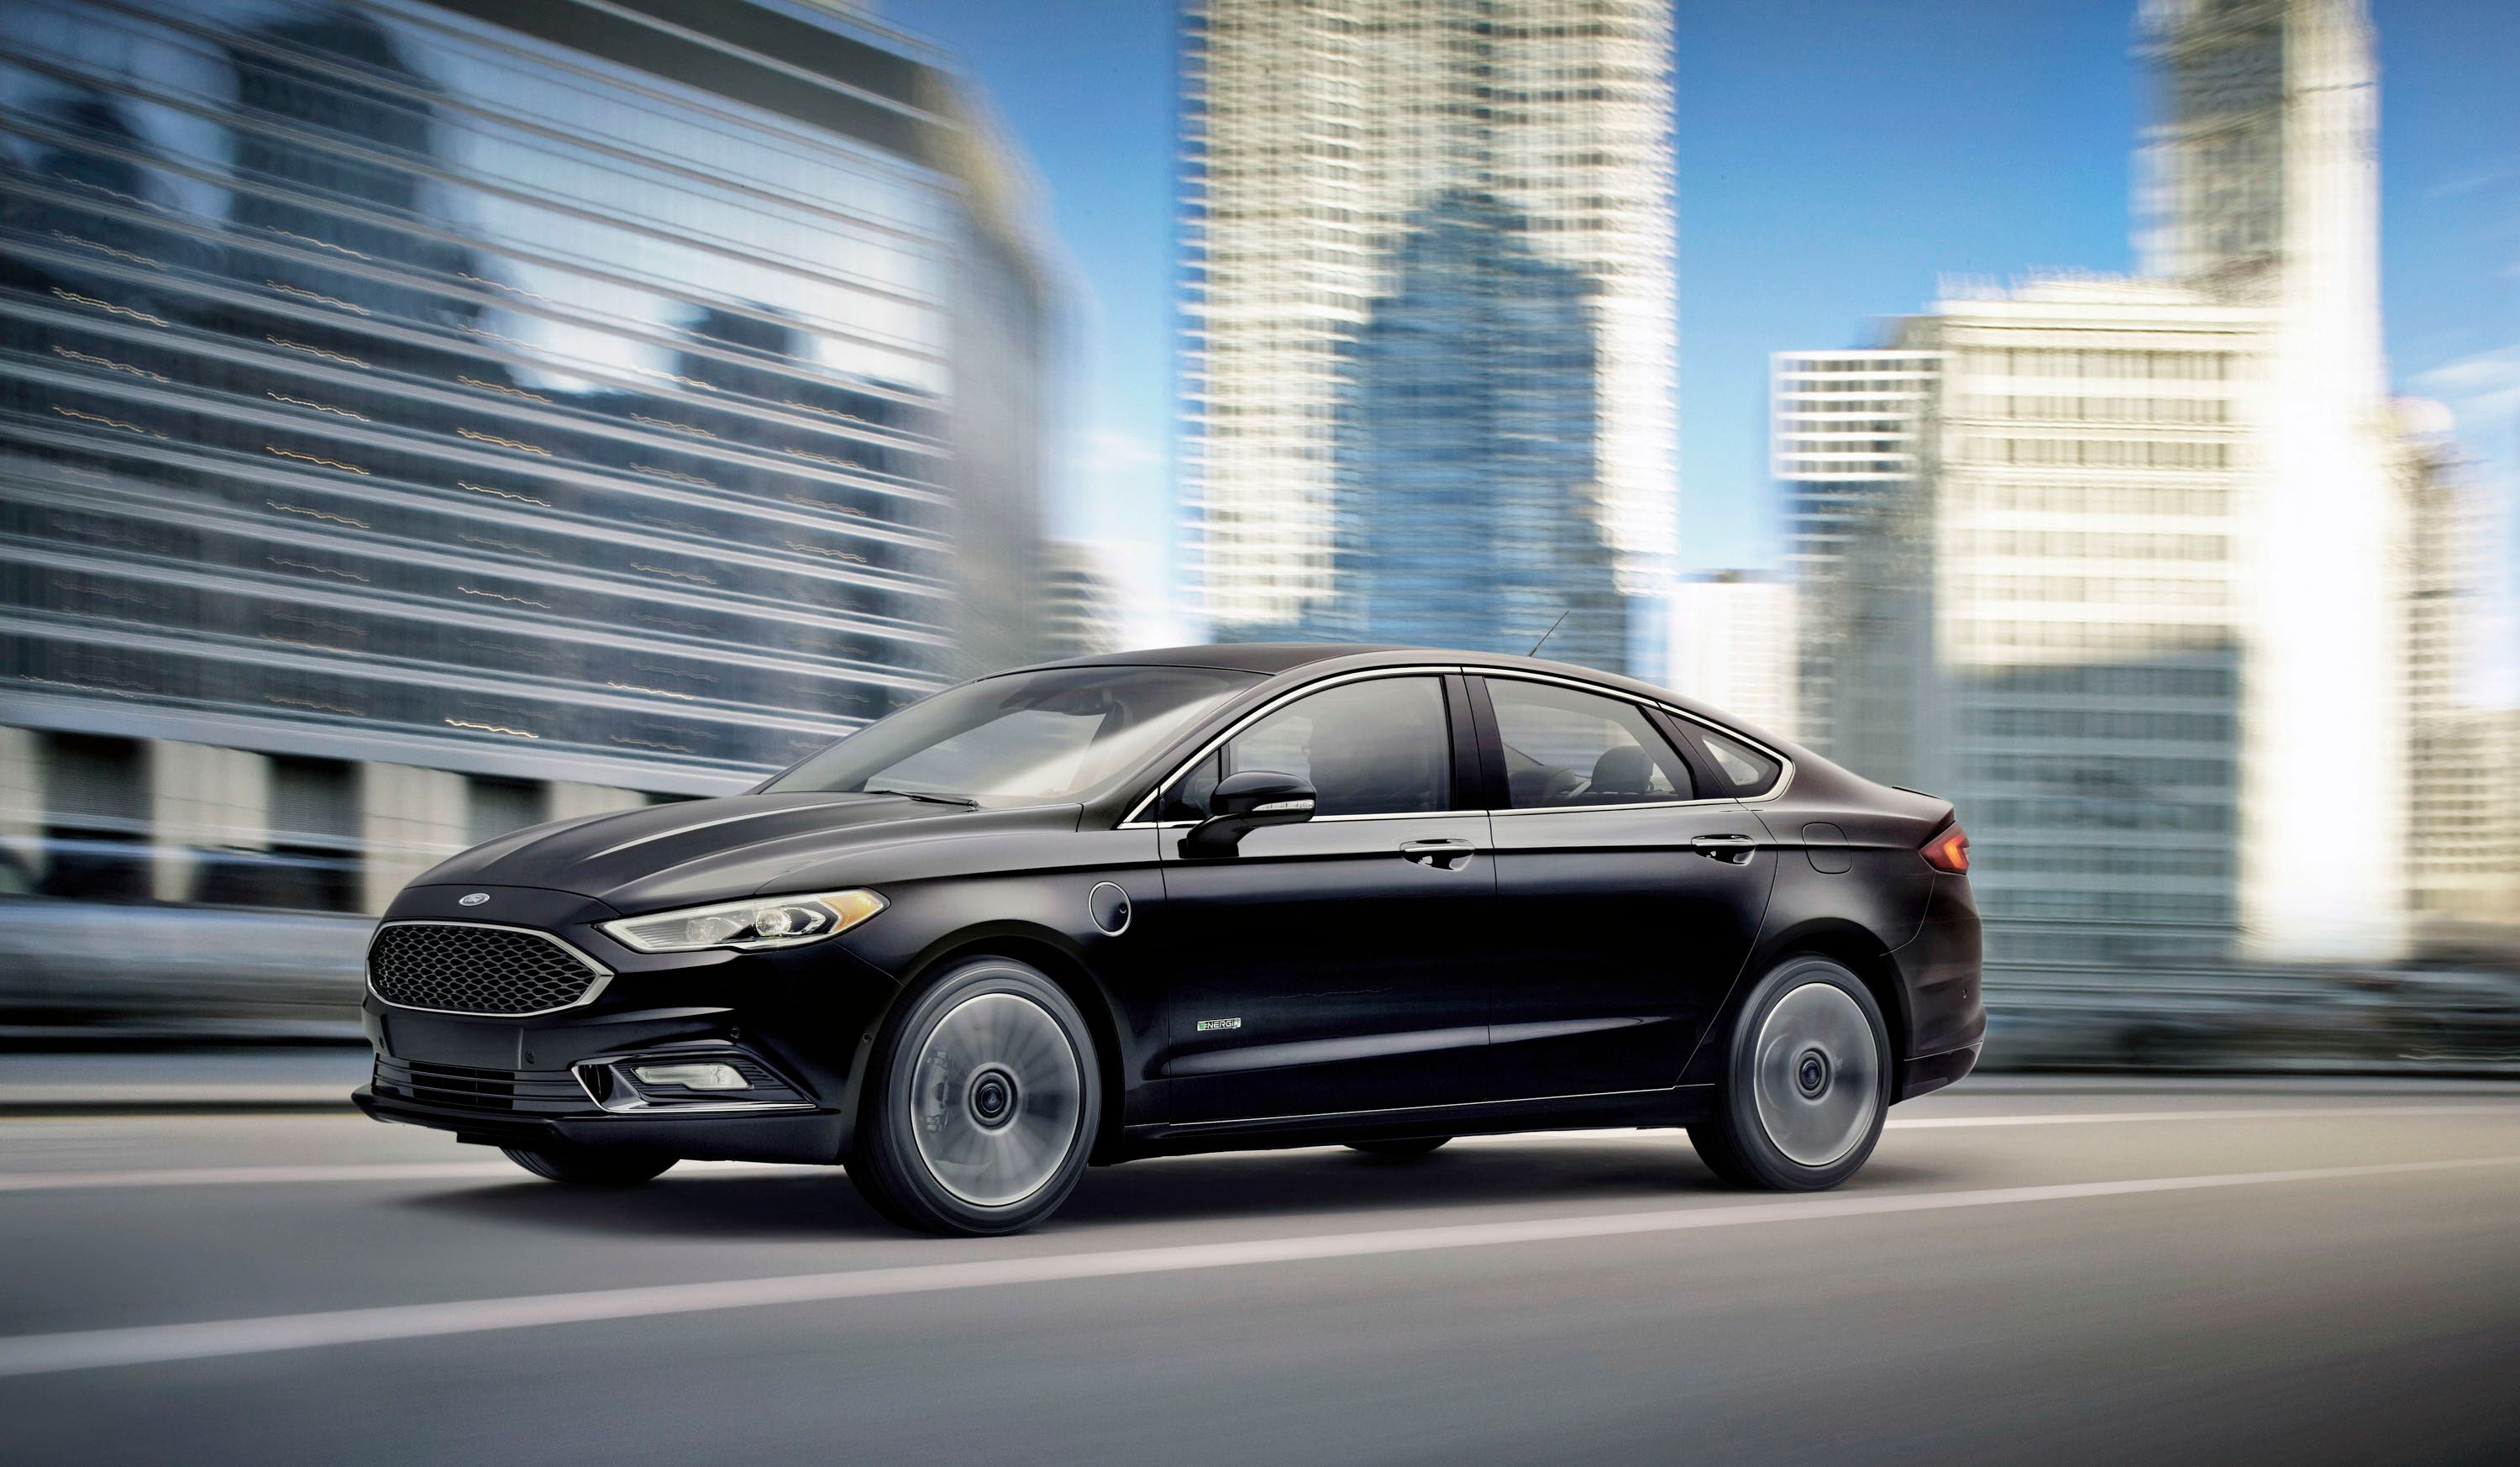 2017 Is The Ford Fusion Getting Axed In The US?